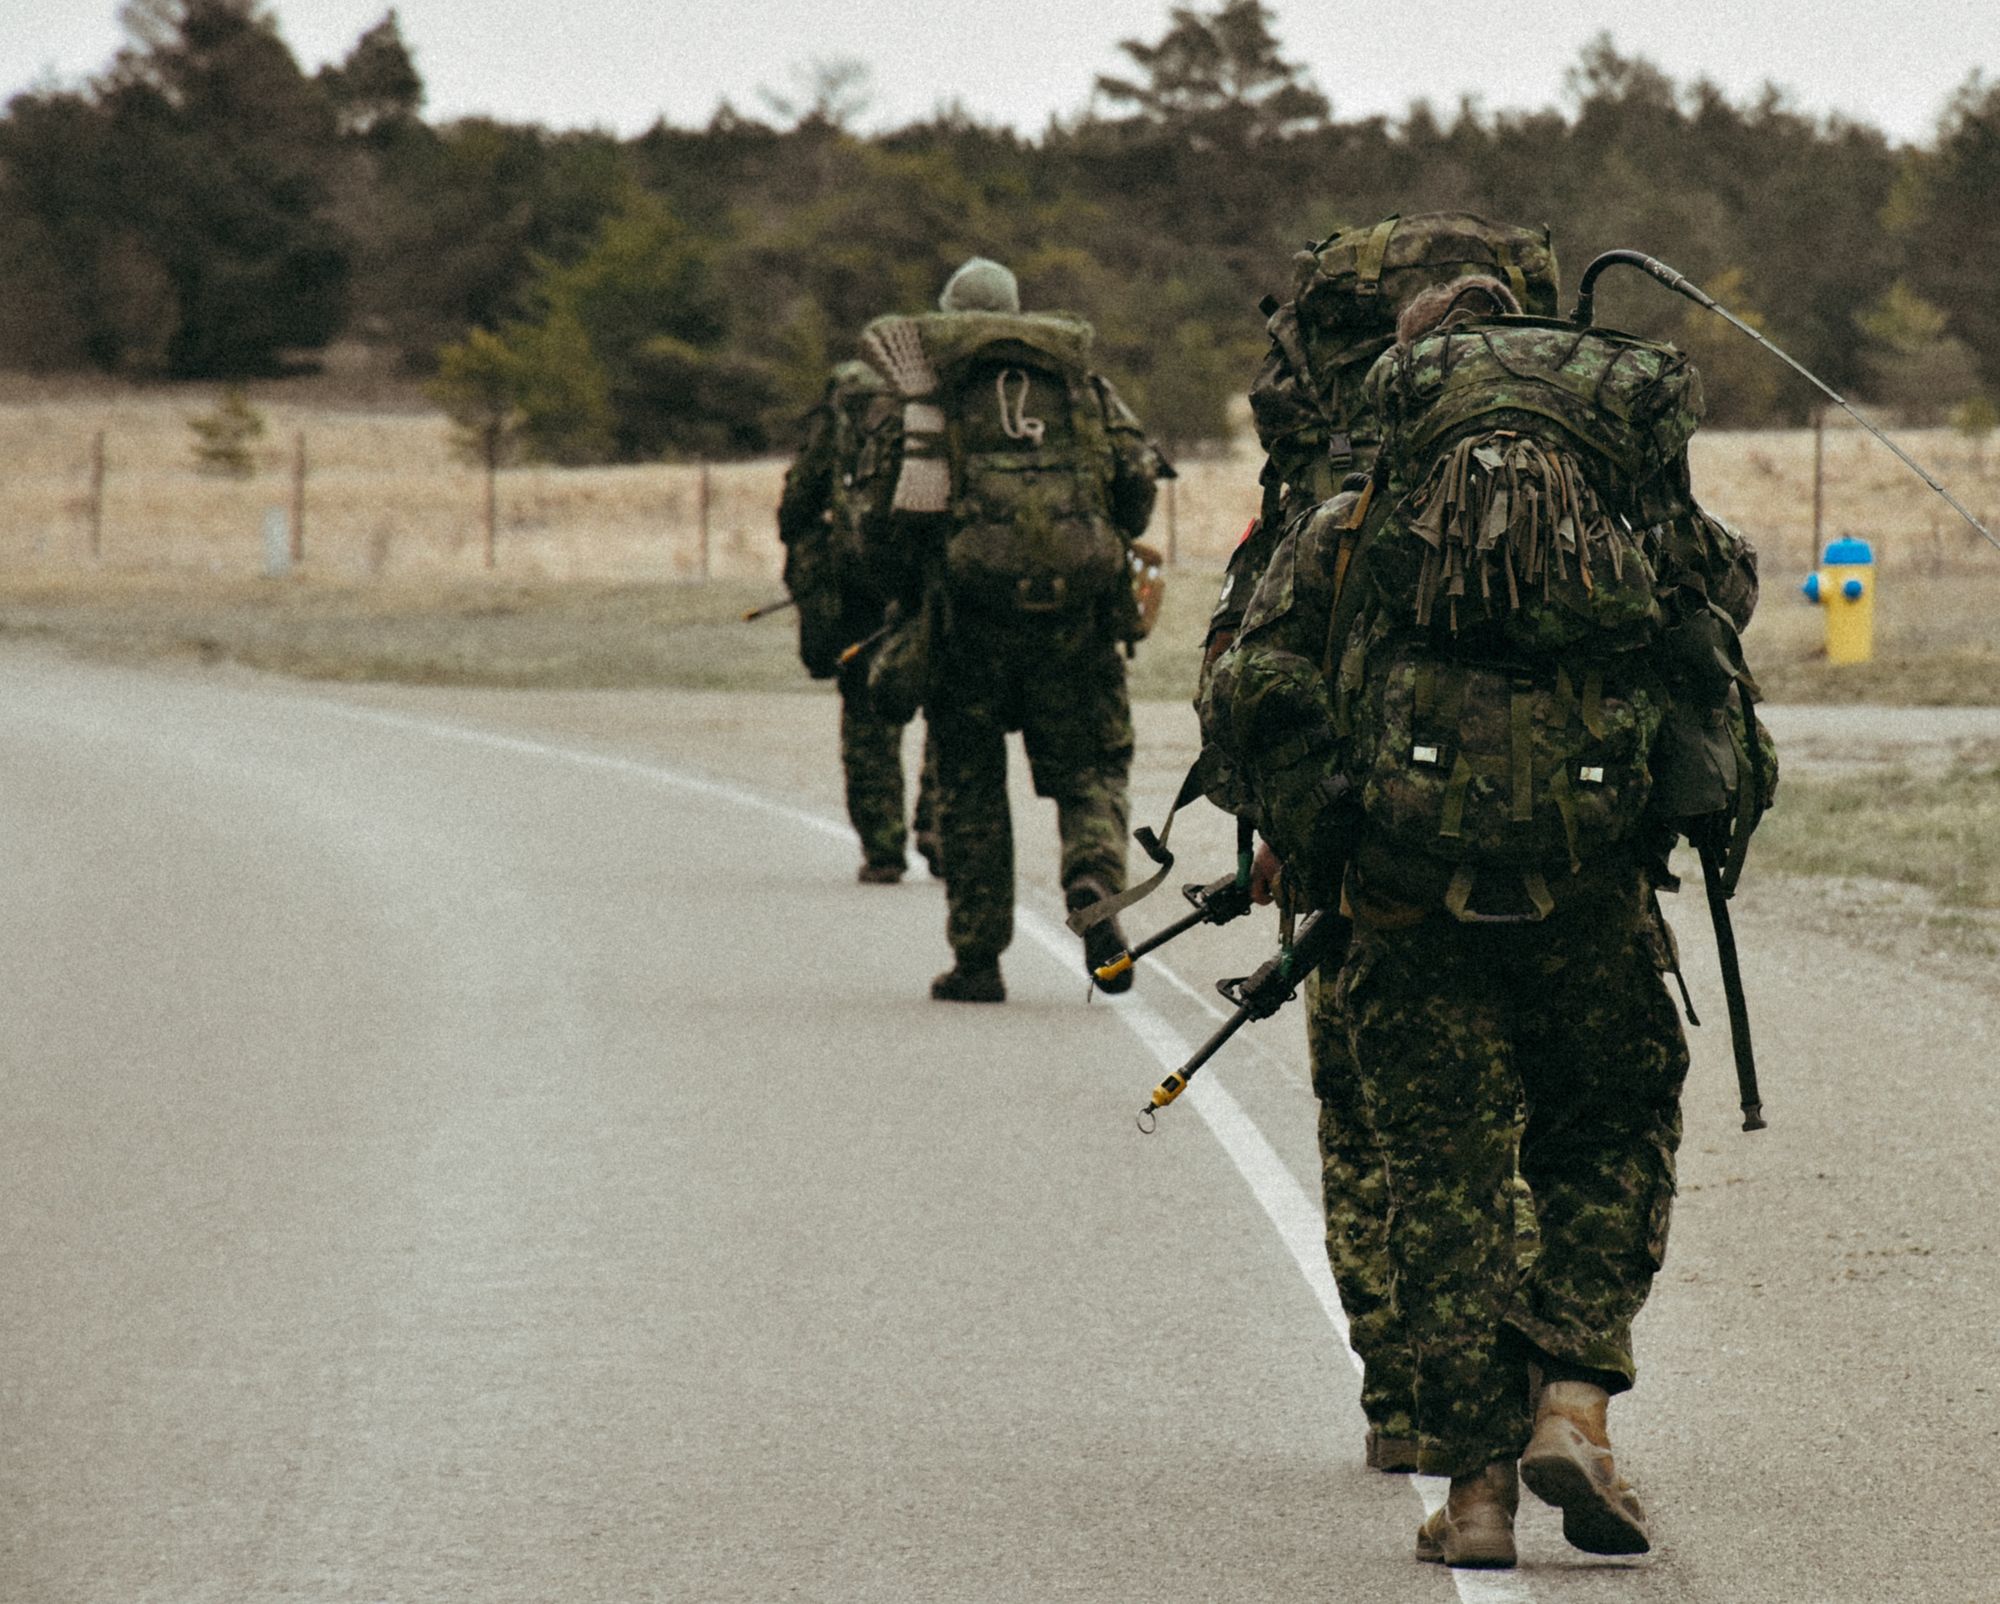 Canada’s ‘Counterinsurgency Doctrine’ Is Up For Review. It Warns About Labour Unrest